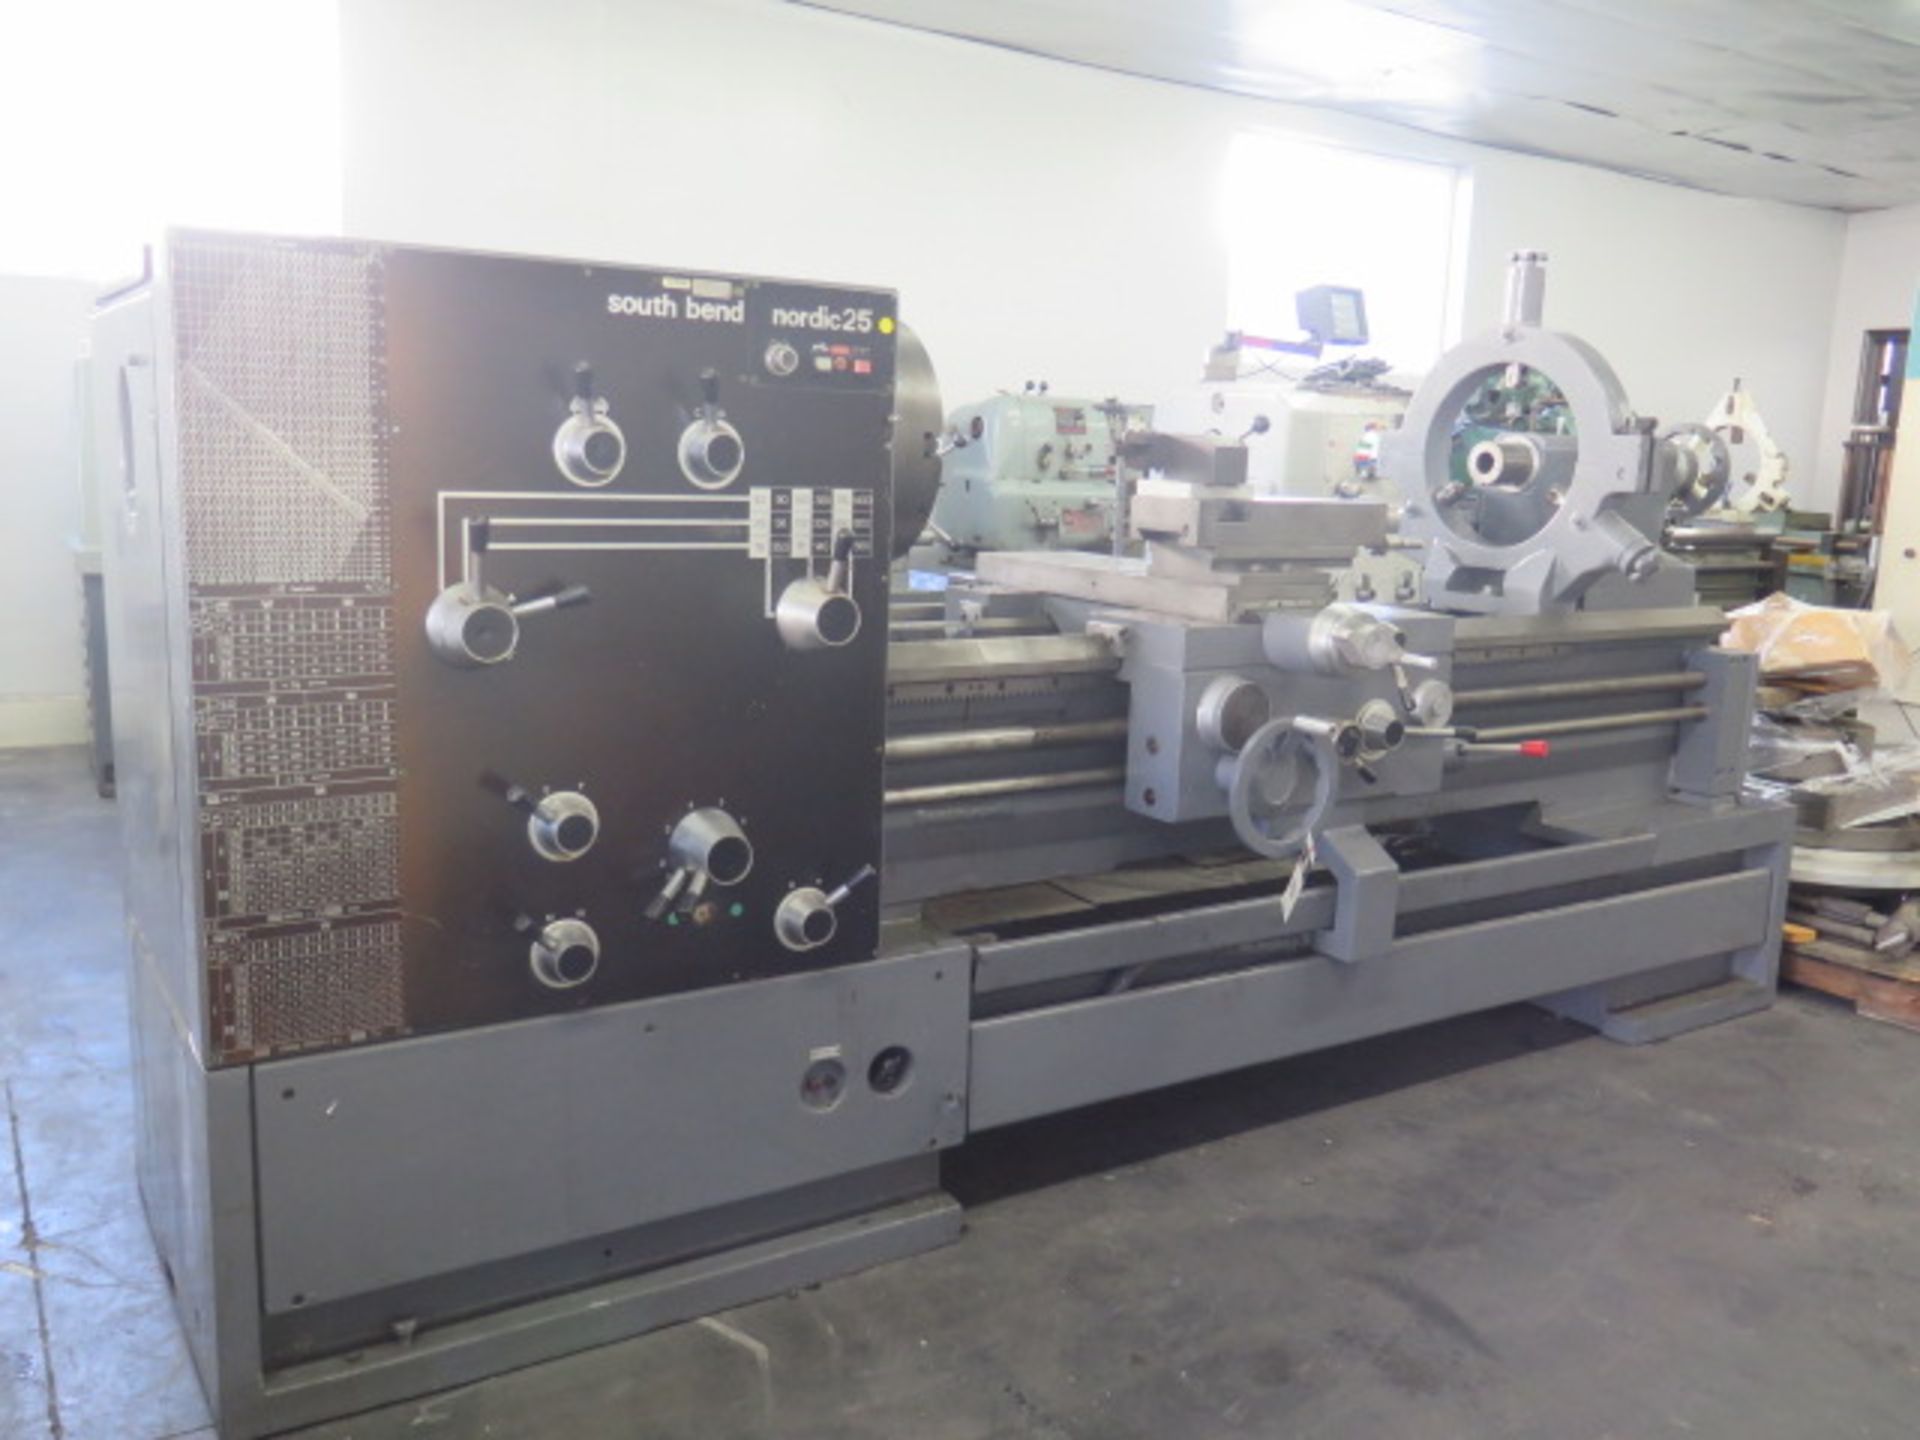 South Bend “Nordic 25” 25” x 60” Geared Gap Bed Lathe w/ 1801400 RPM, Taper Attachment, SOLD AS IS